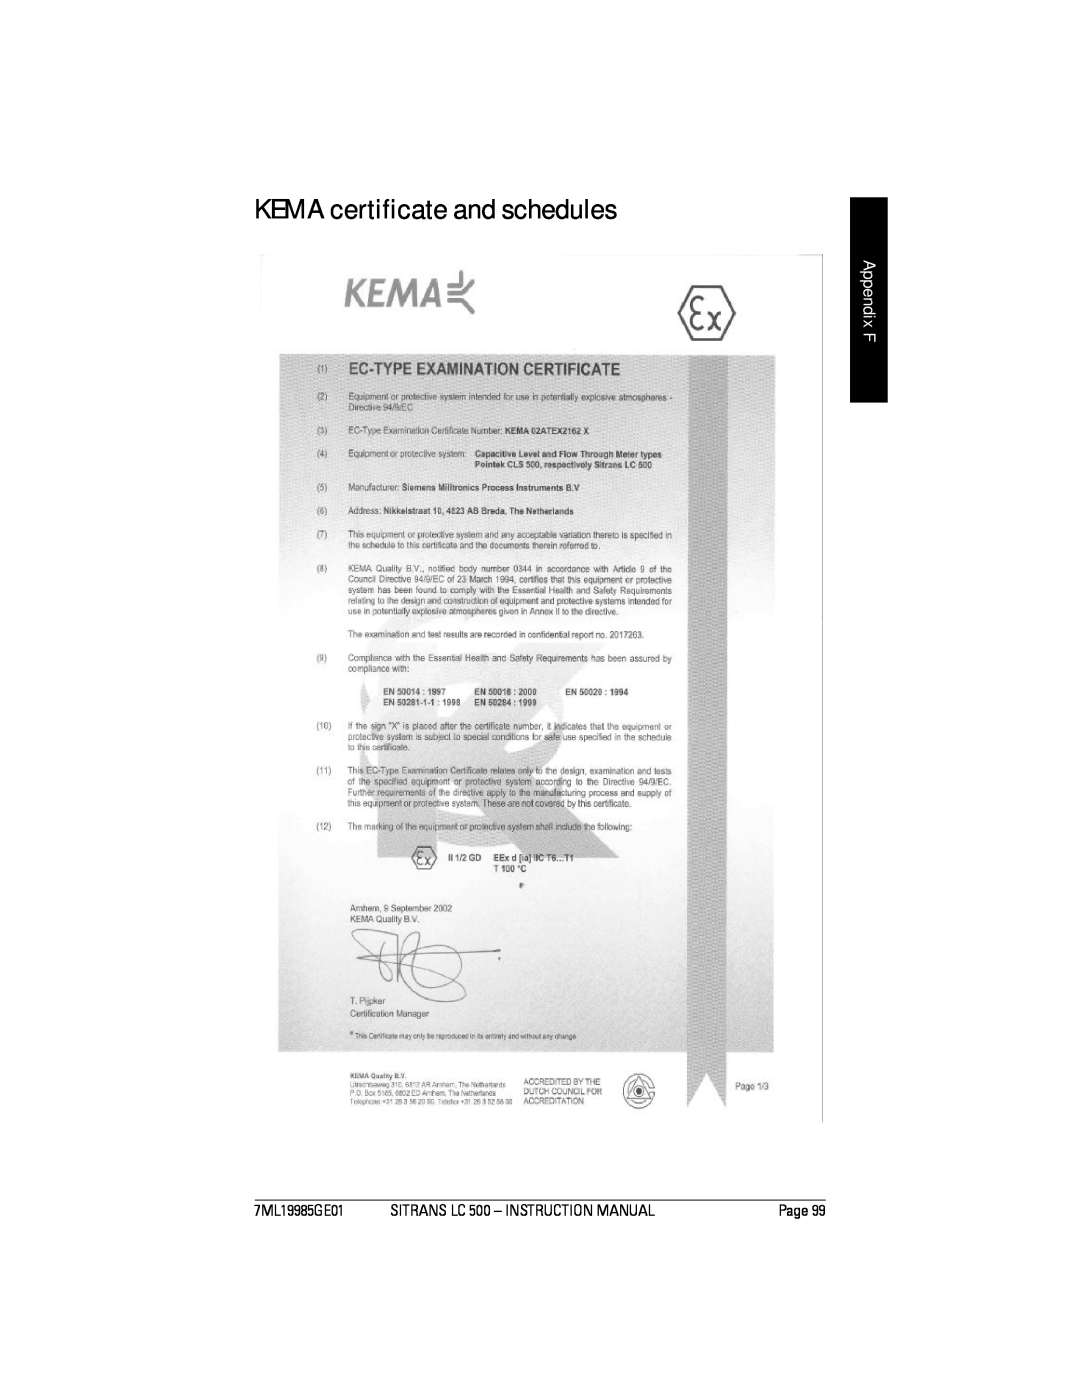 Siemens Sitrans, LC 500 instruction manual KEMA certificate and schedules, Appendix F, Page 